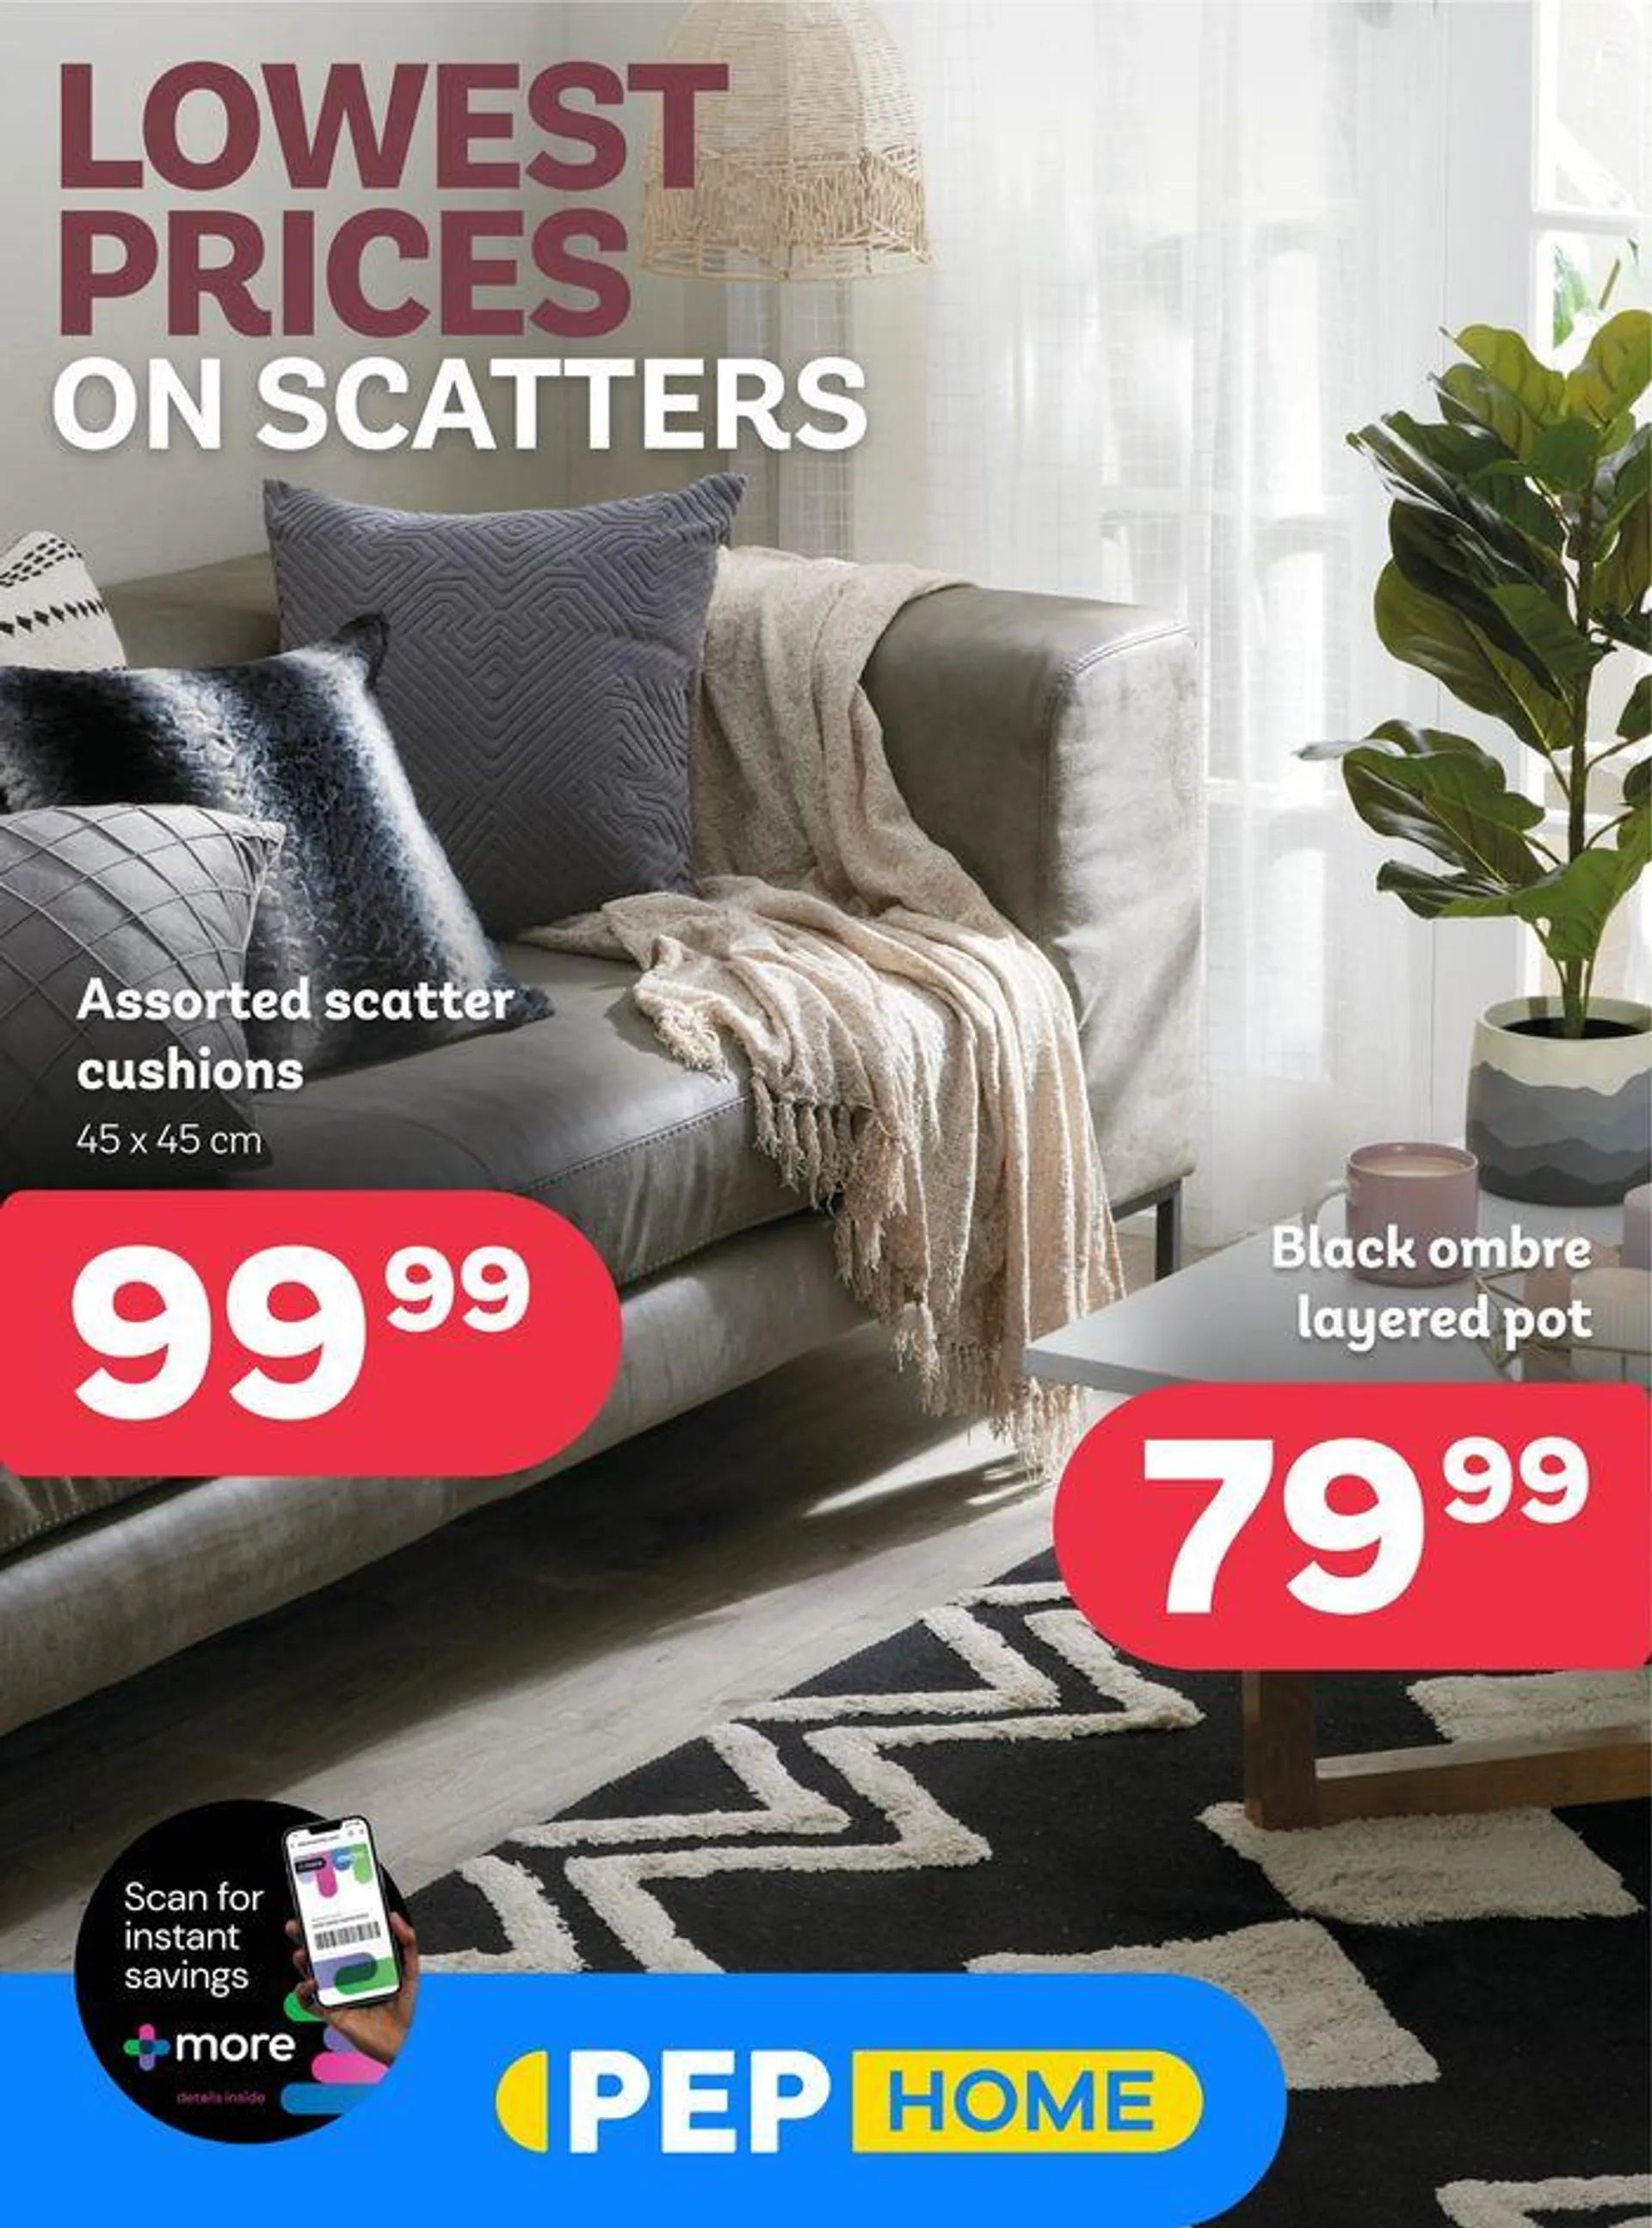 Lowest prices on scatters - 1